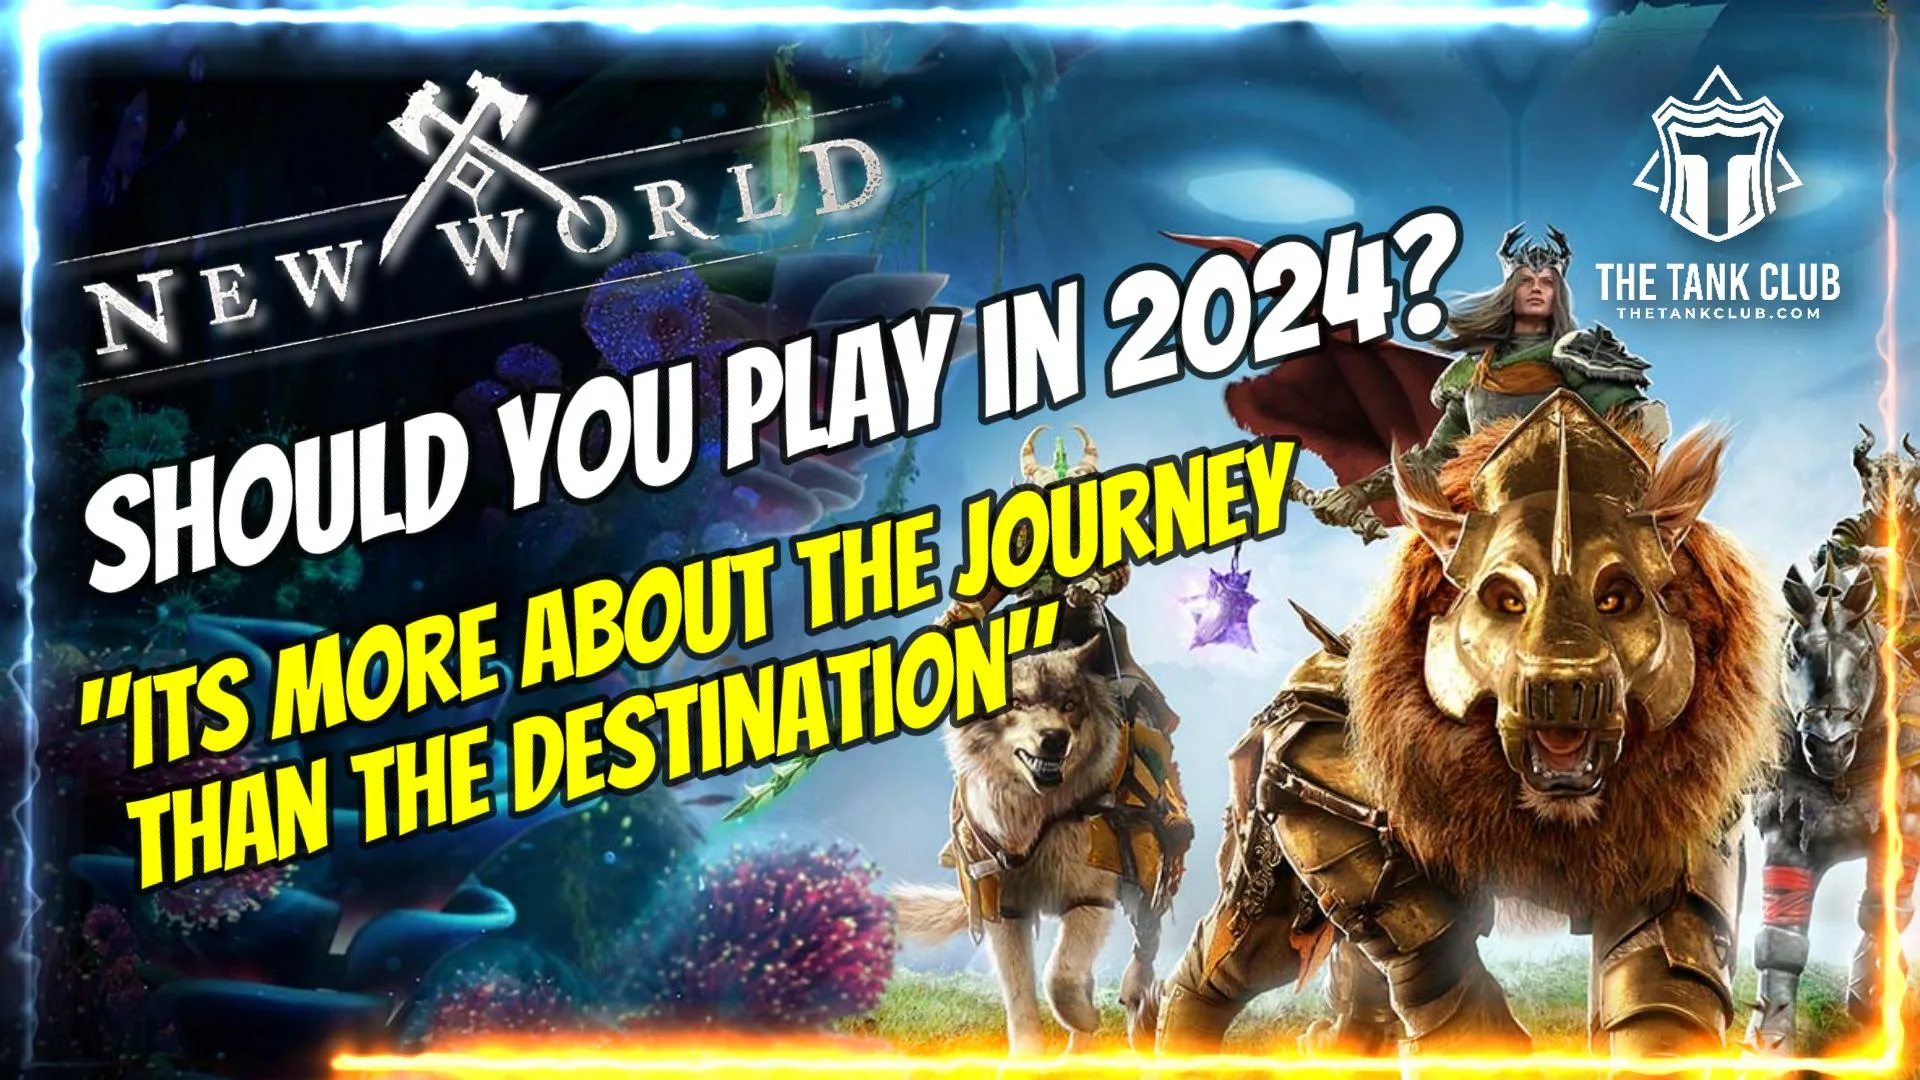 Should You Play New World in 2024?